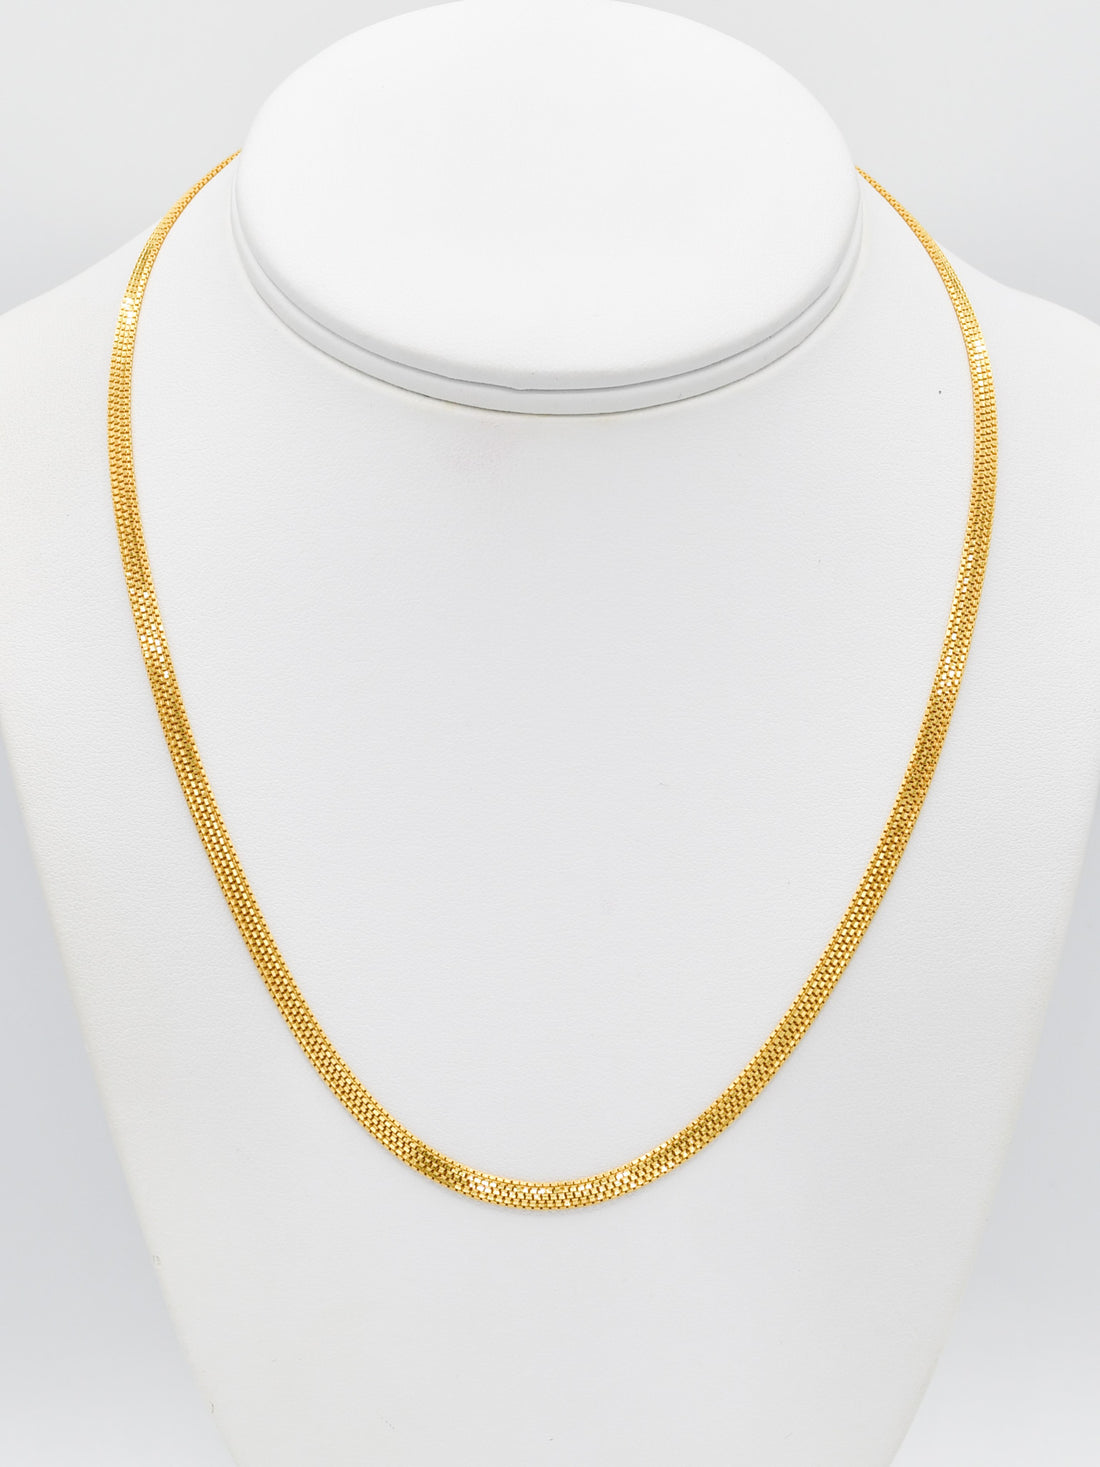 22ct Gold Flat Chain - Roop Darshan